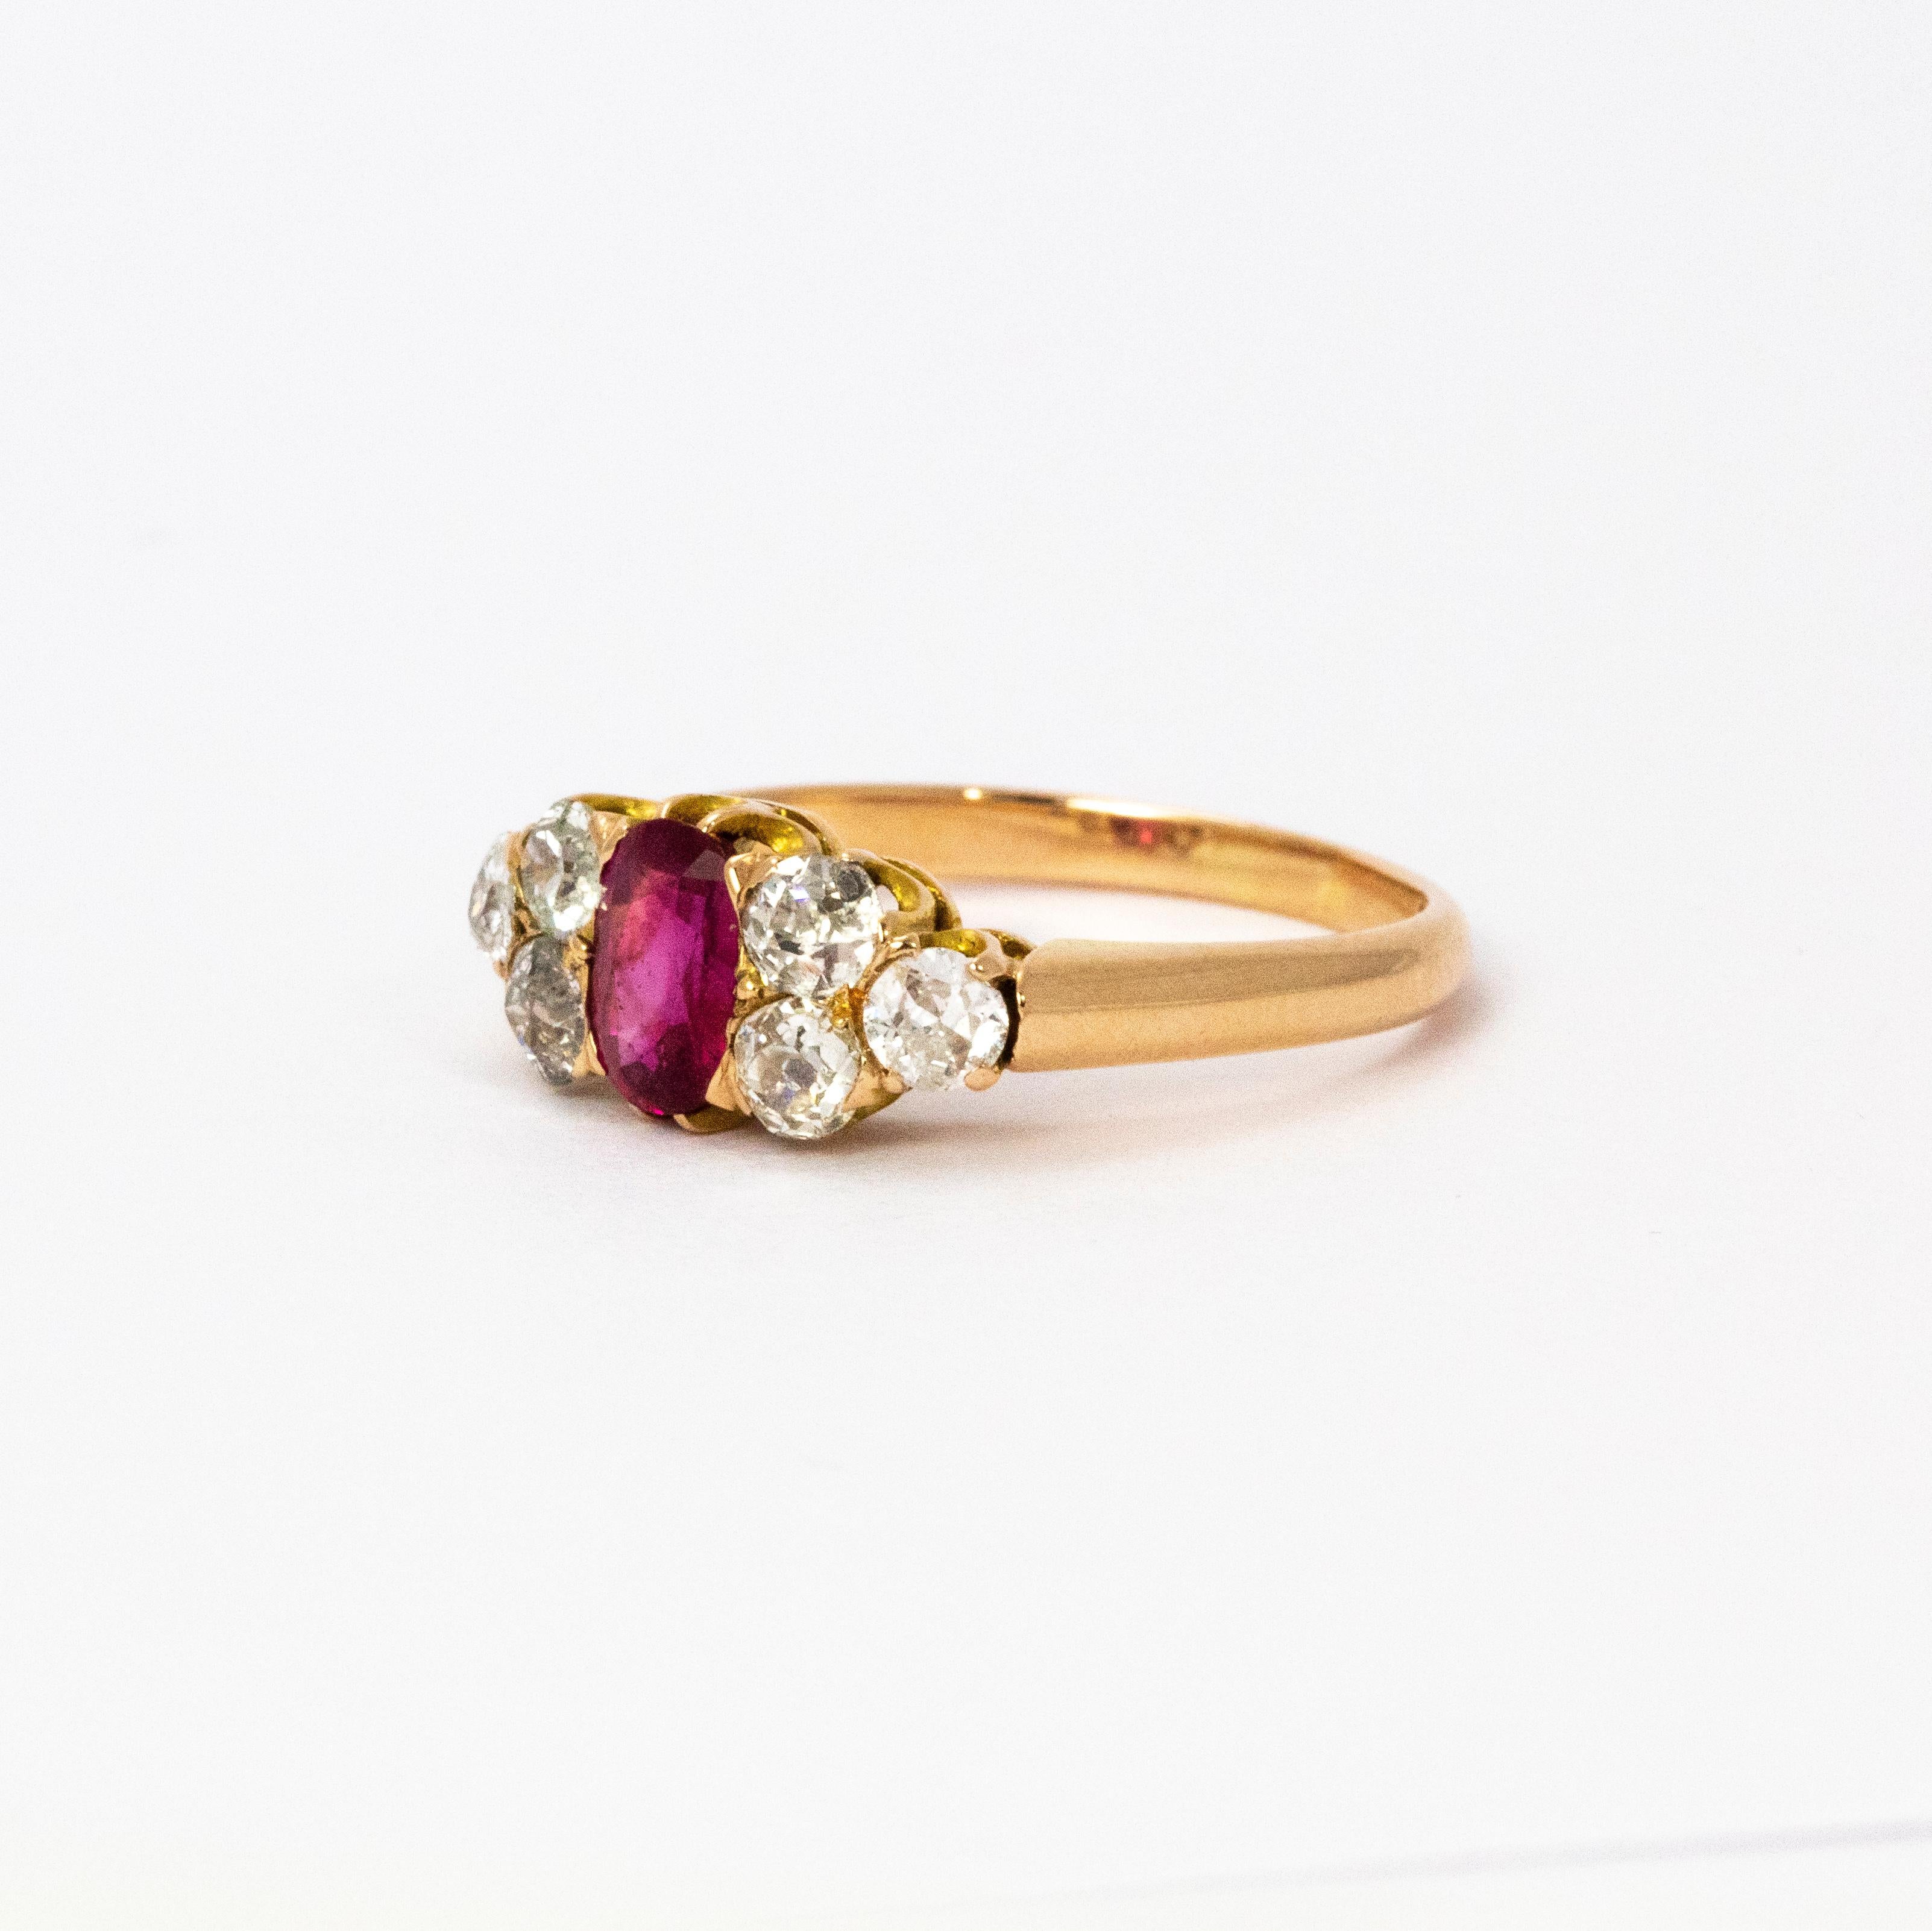 A beautiful late Victorian ring, centrally set with a stunning ruby measuring approximately 65 points and with great pink colour. Either side sits a trio of old European cut diamonds measuring a total of 90 points. Total diamond weight 1.8 carats.